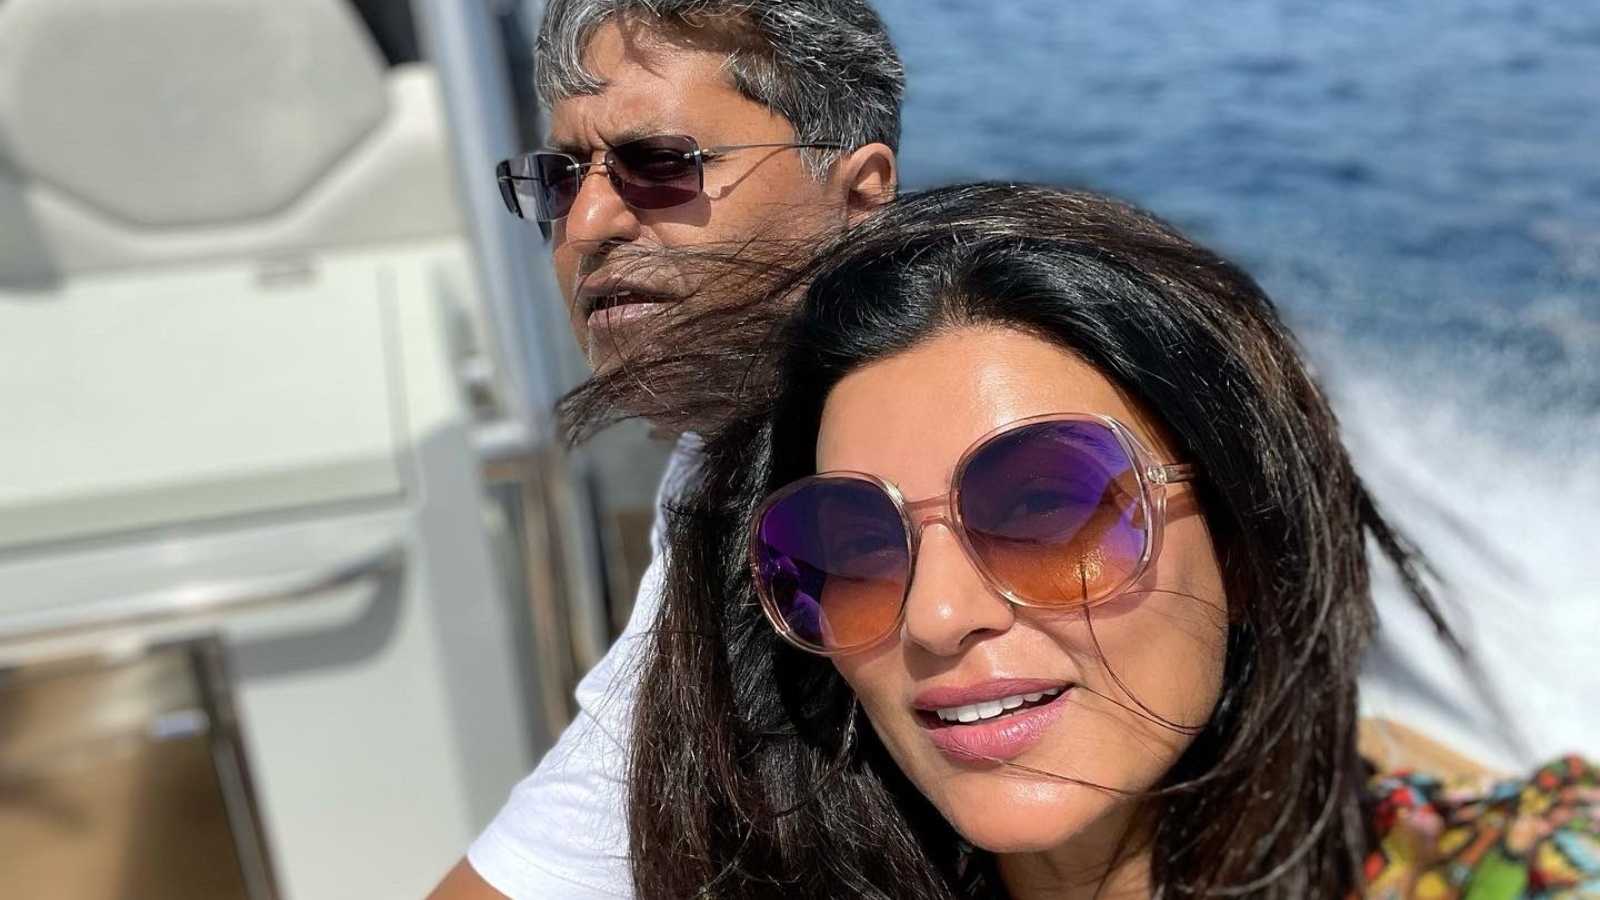 'None of your business': Sushmita Sen on being judged for relationship with Lalit Modi